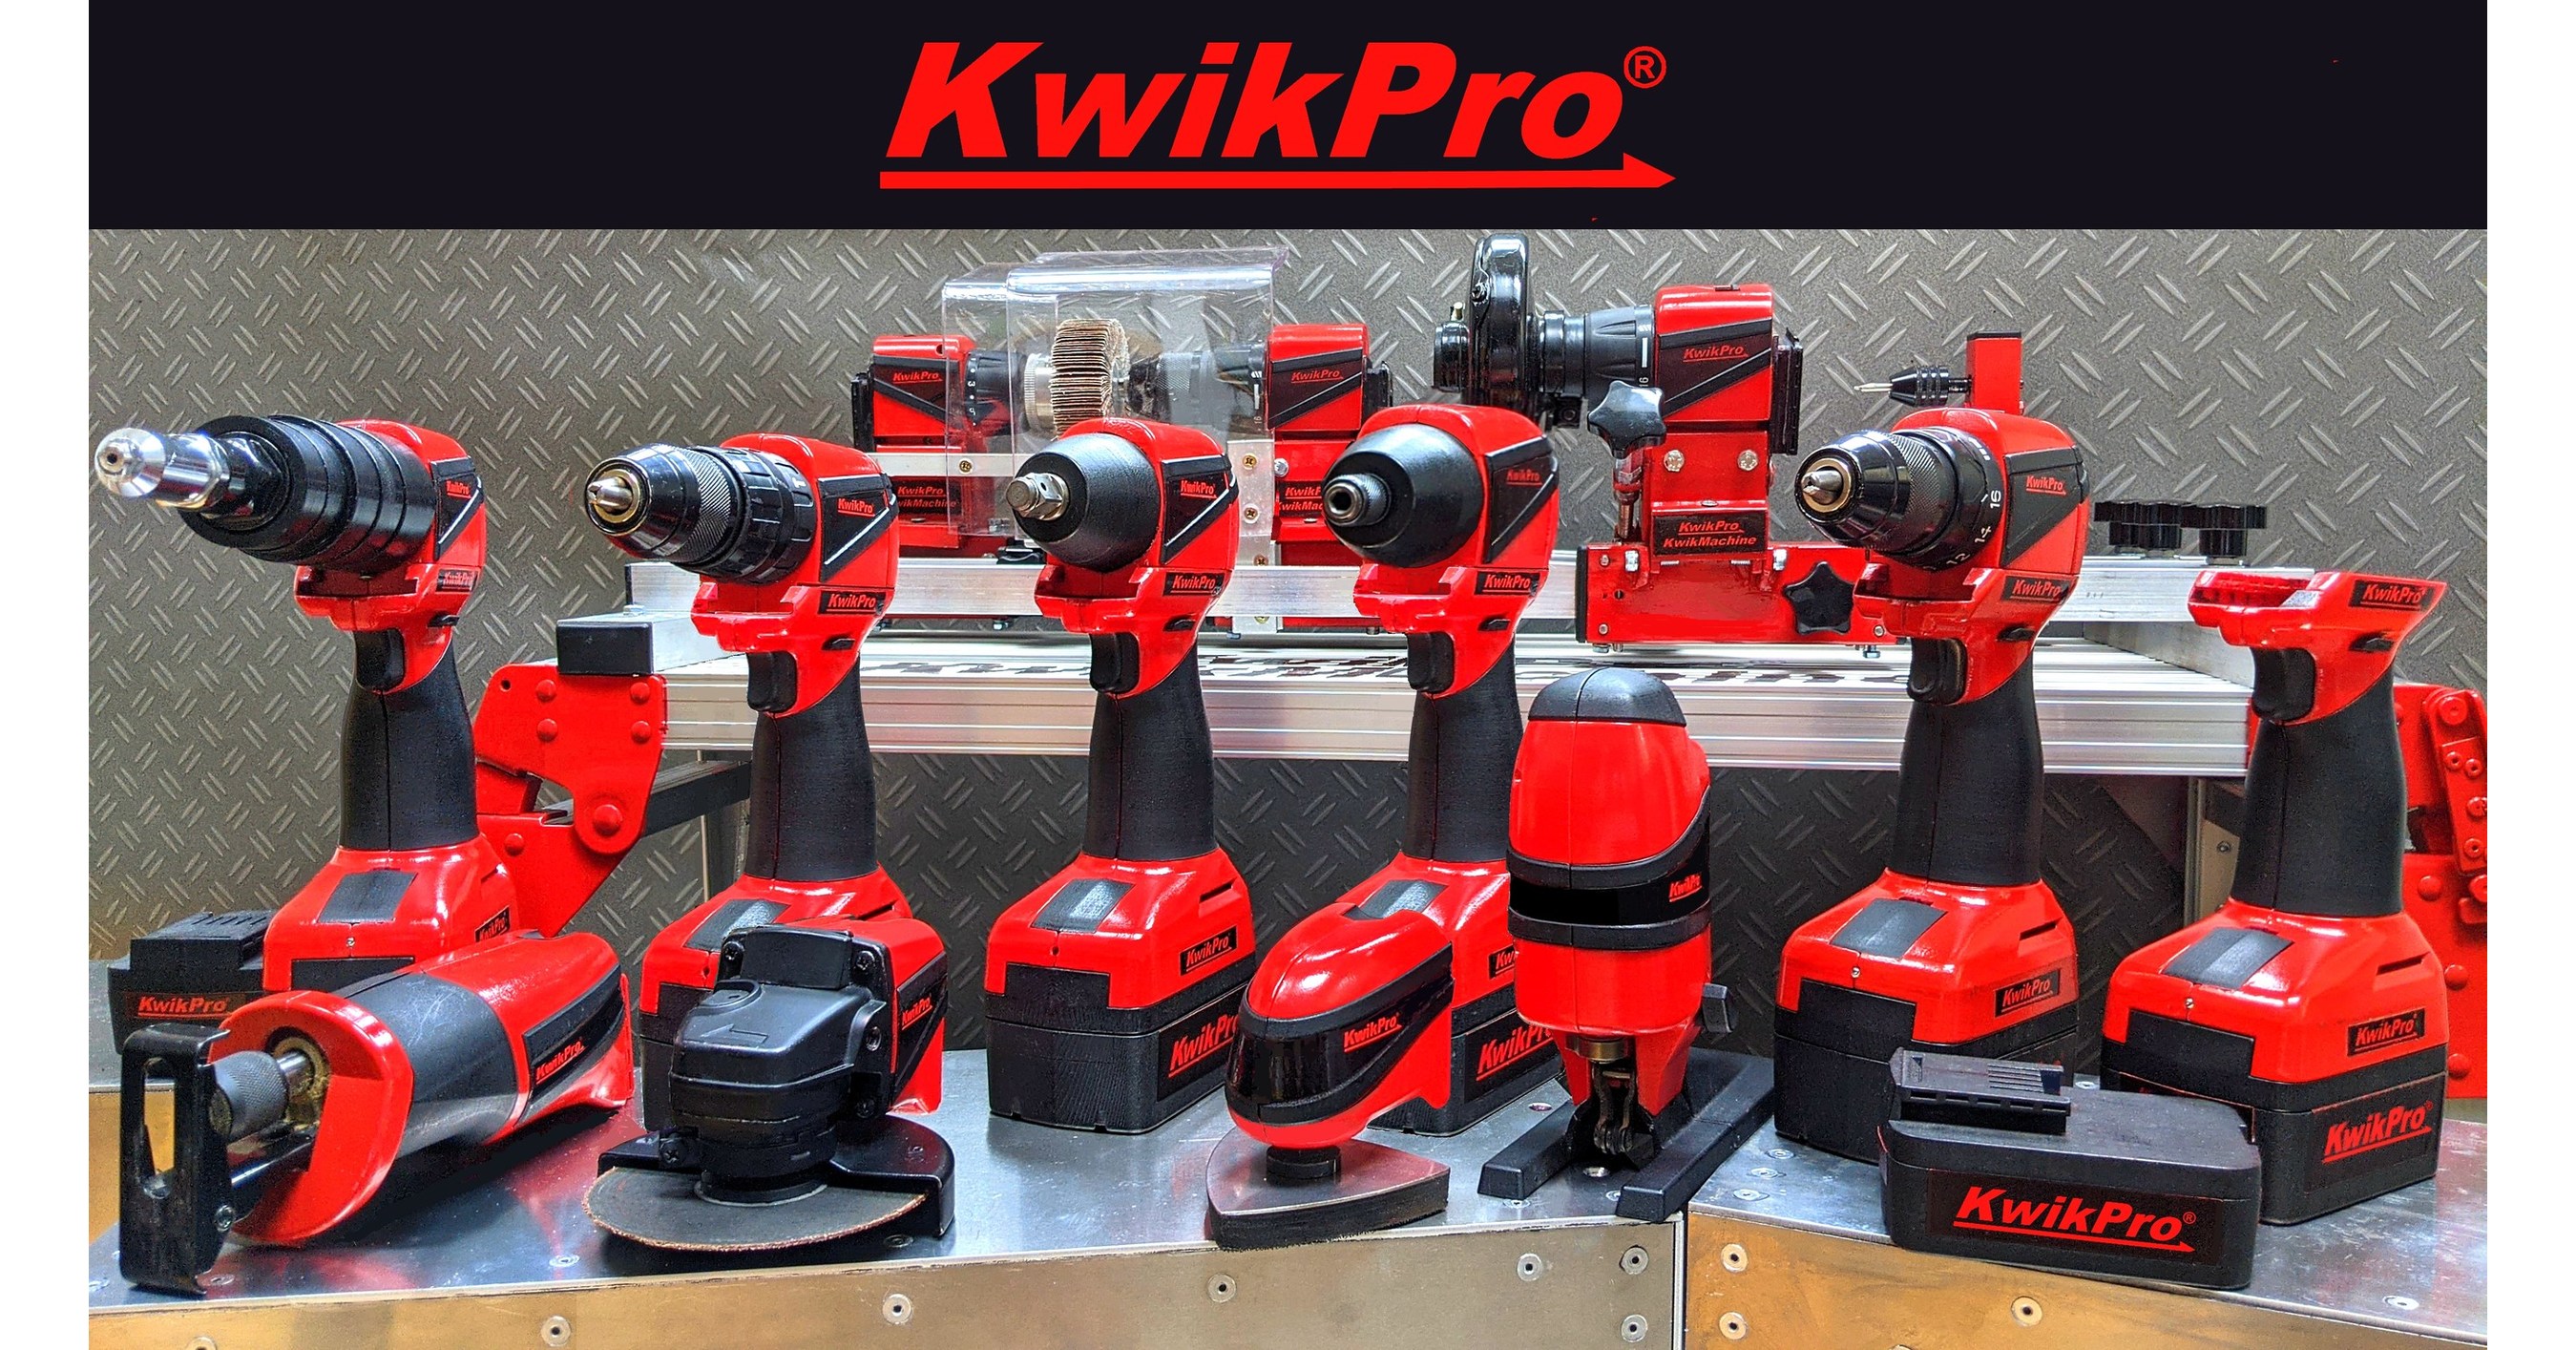 KwikPro to Launch Revolutionary New Work and Leisure Tool That Powers It All for Crowdfunding Pre-Orders